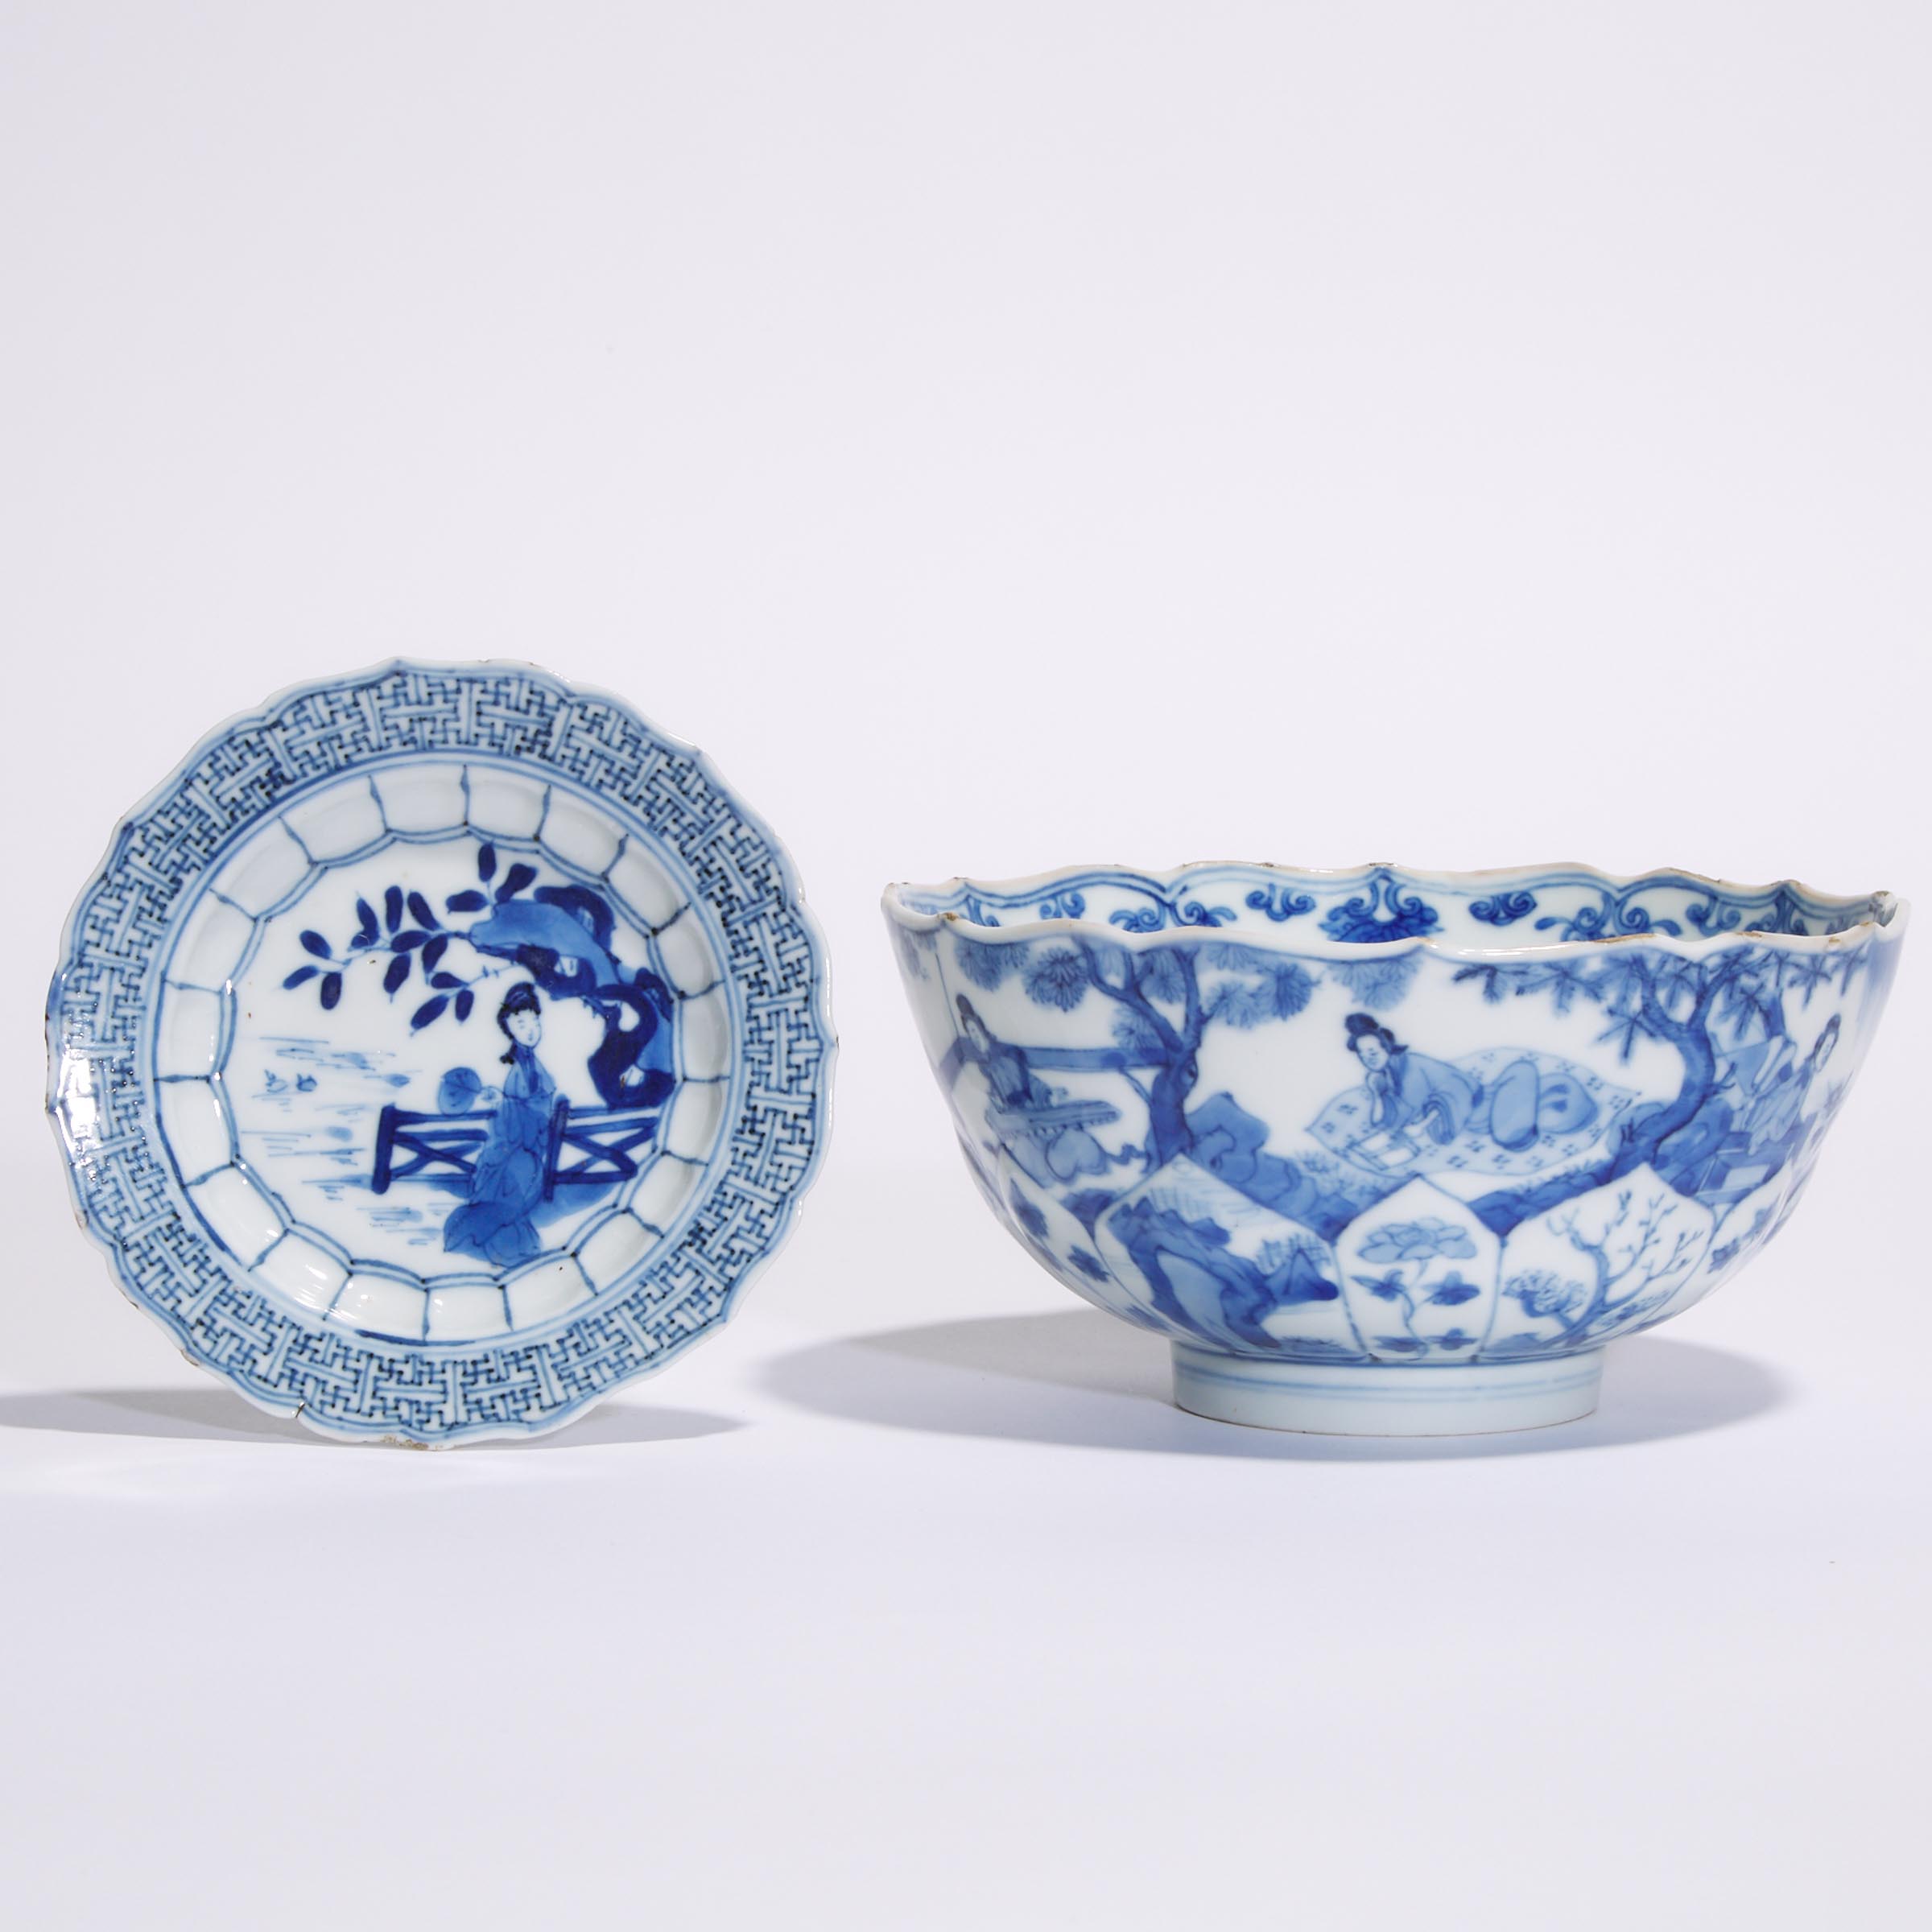 A Blue and White Barbed-Rim 'Lotus' Bowl, Kangxi Mark and Period (1662-1722), Together With a Saucer